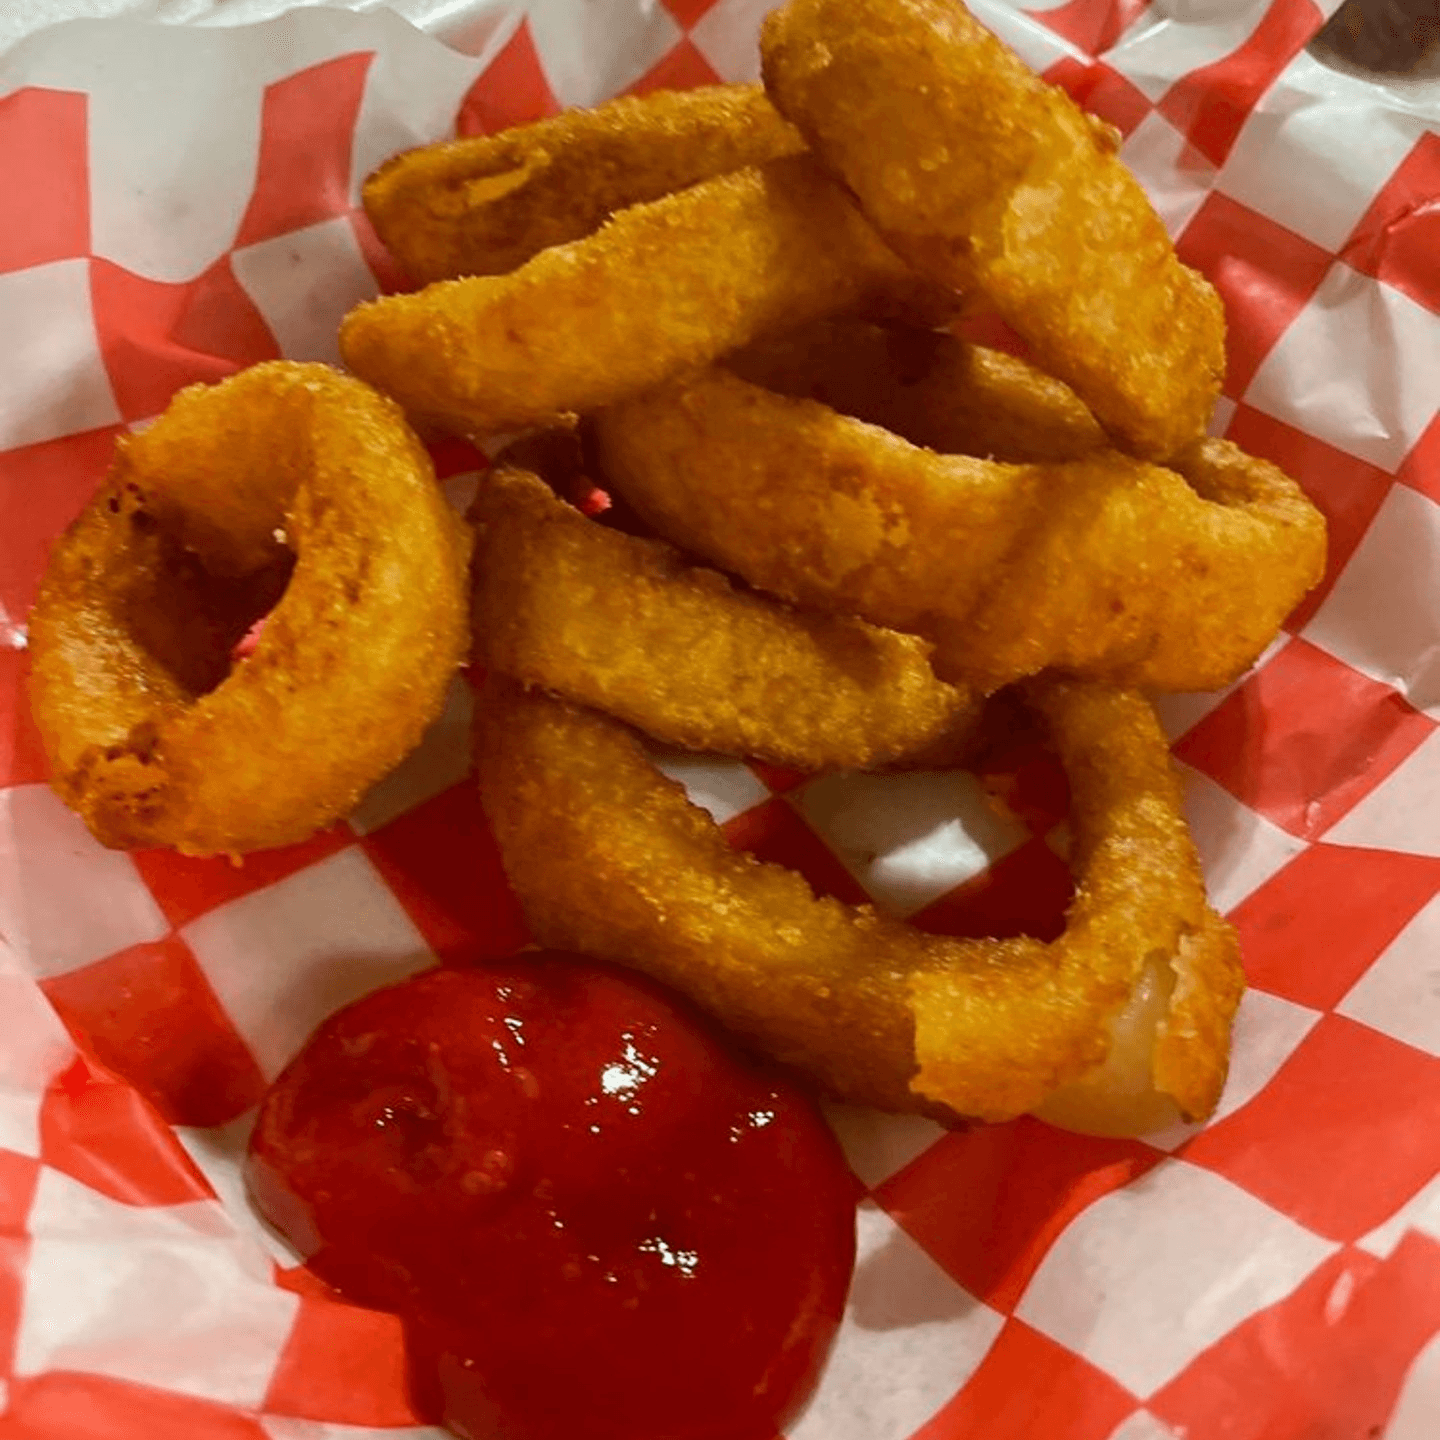 Our mouthwatering Onion Rings!